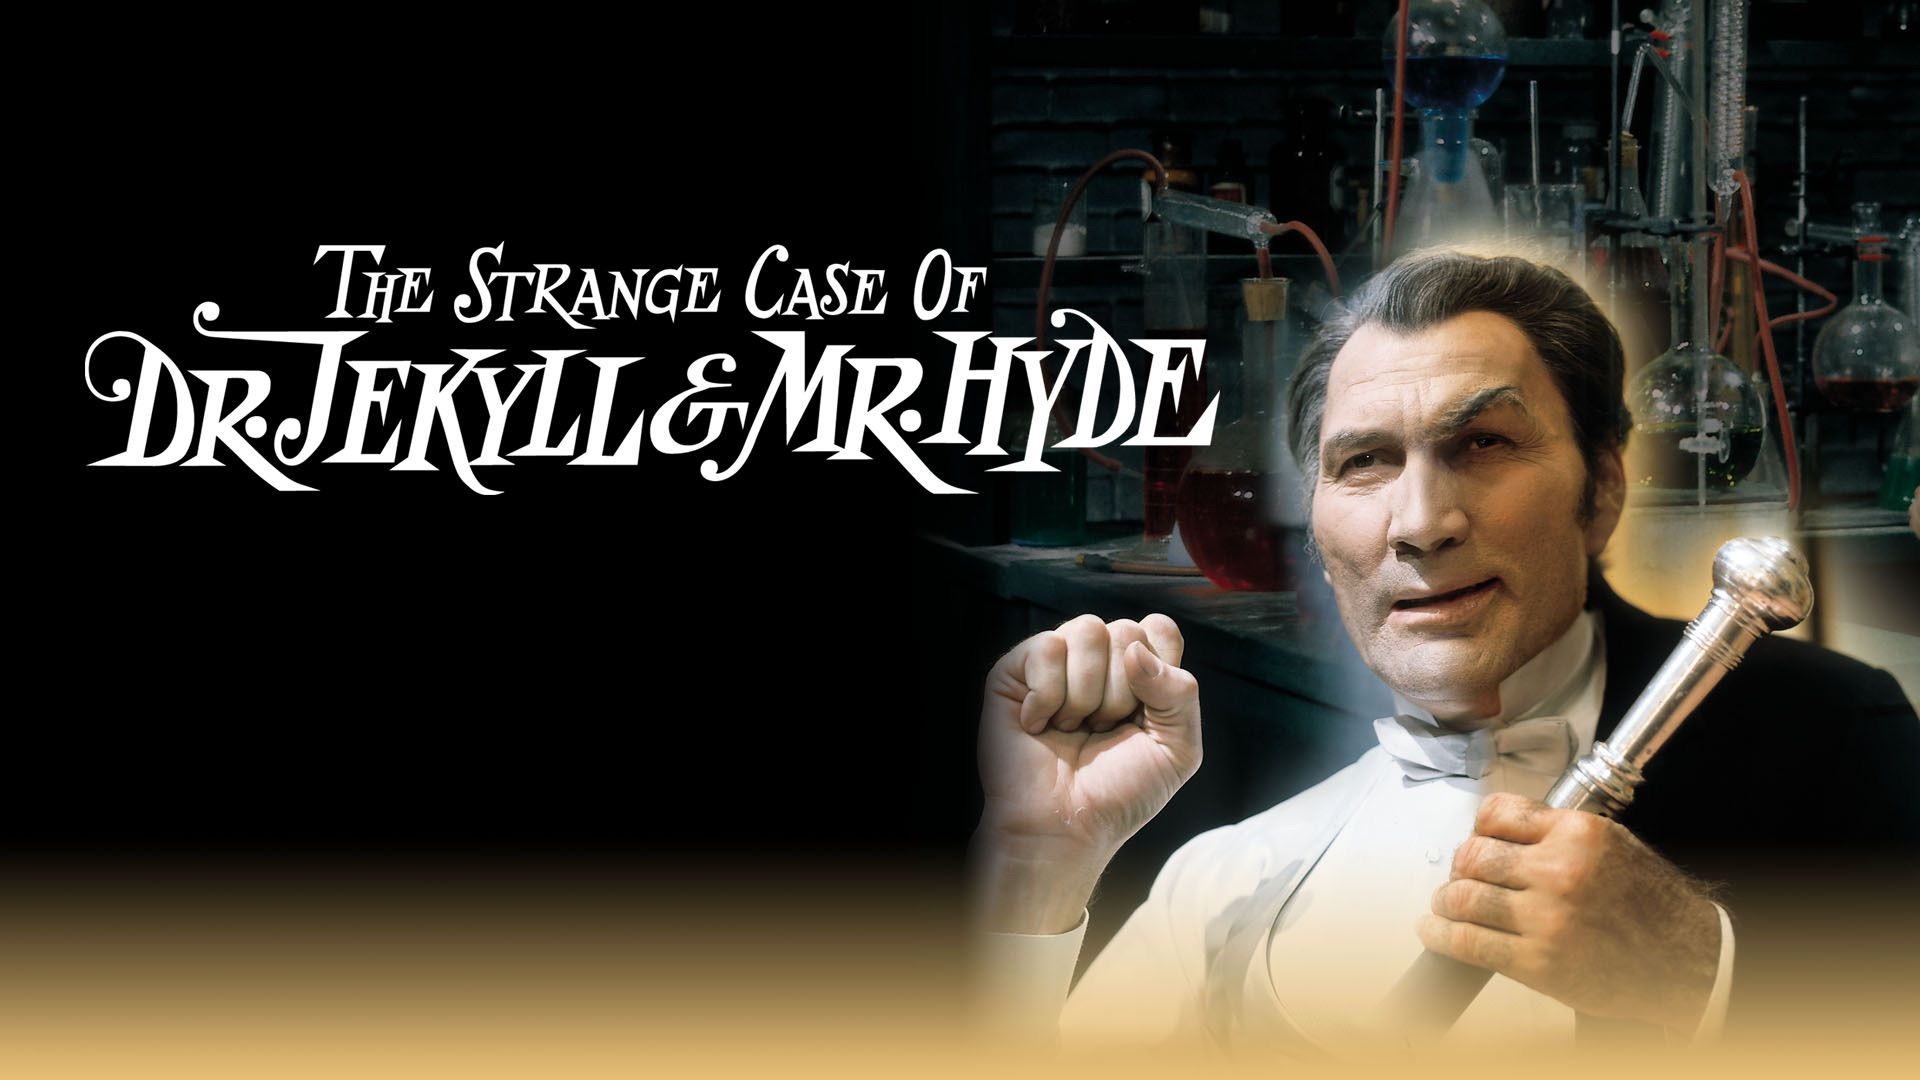 The Strange Case of Dr. Jekyll and Mr. Hyde Backdrop